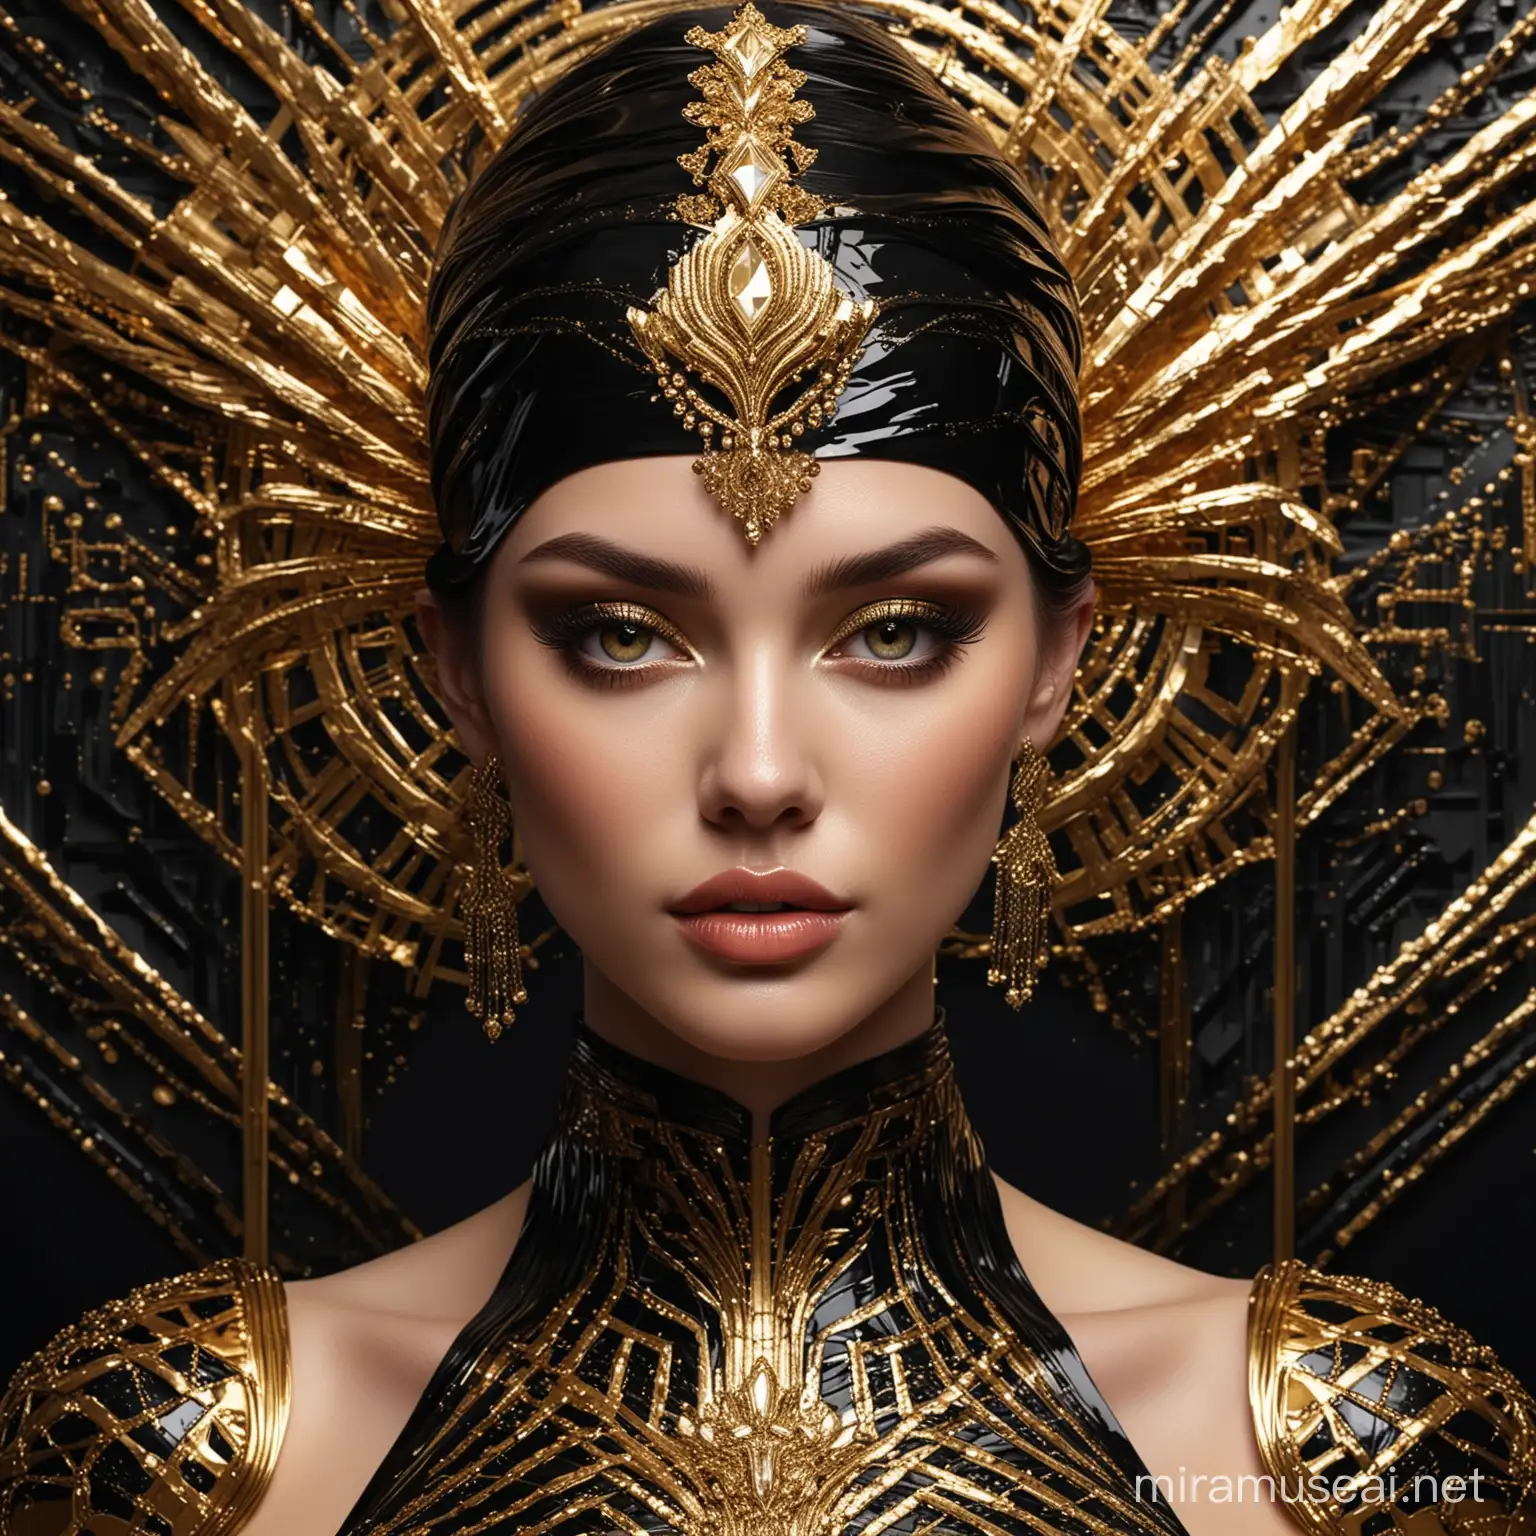 Luxurious Black and Gold Woman Hyperrealistic Digital Portrait